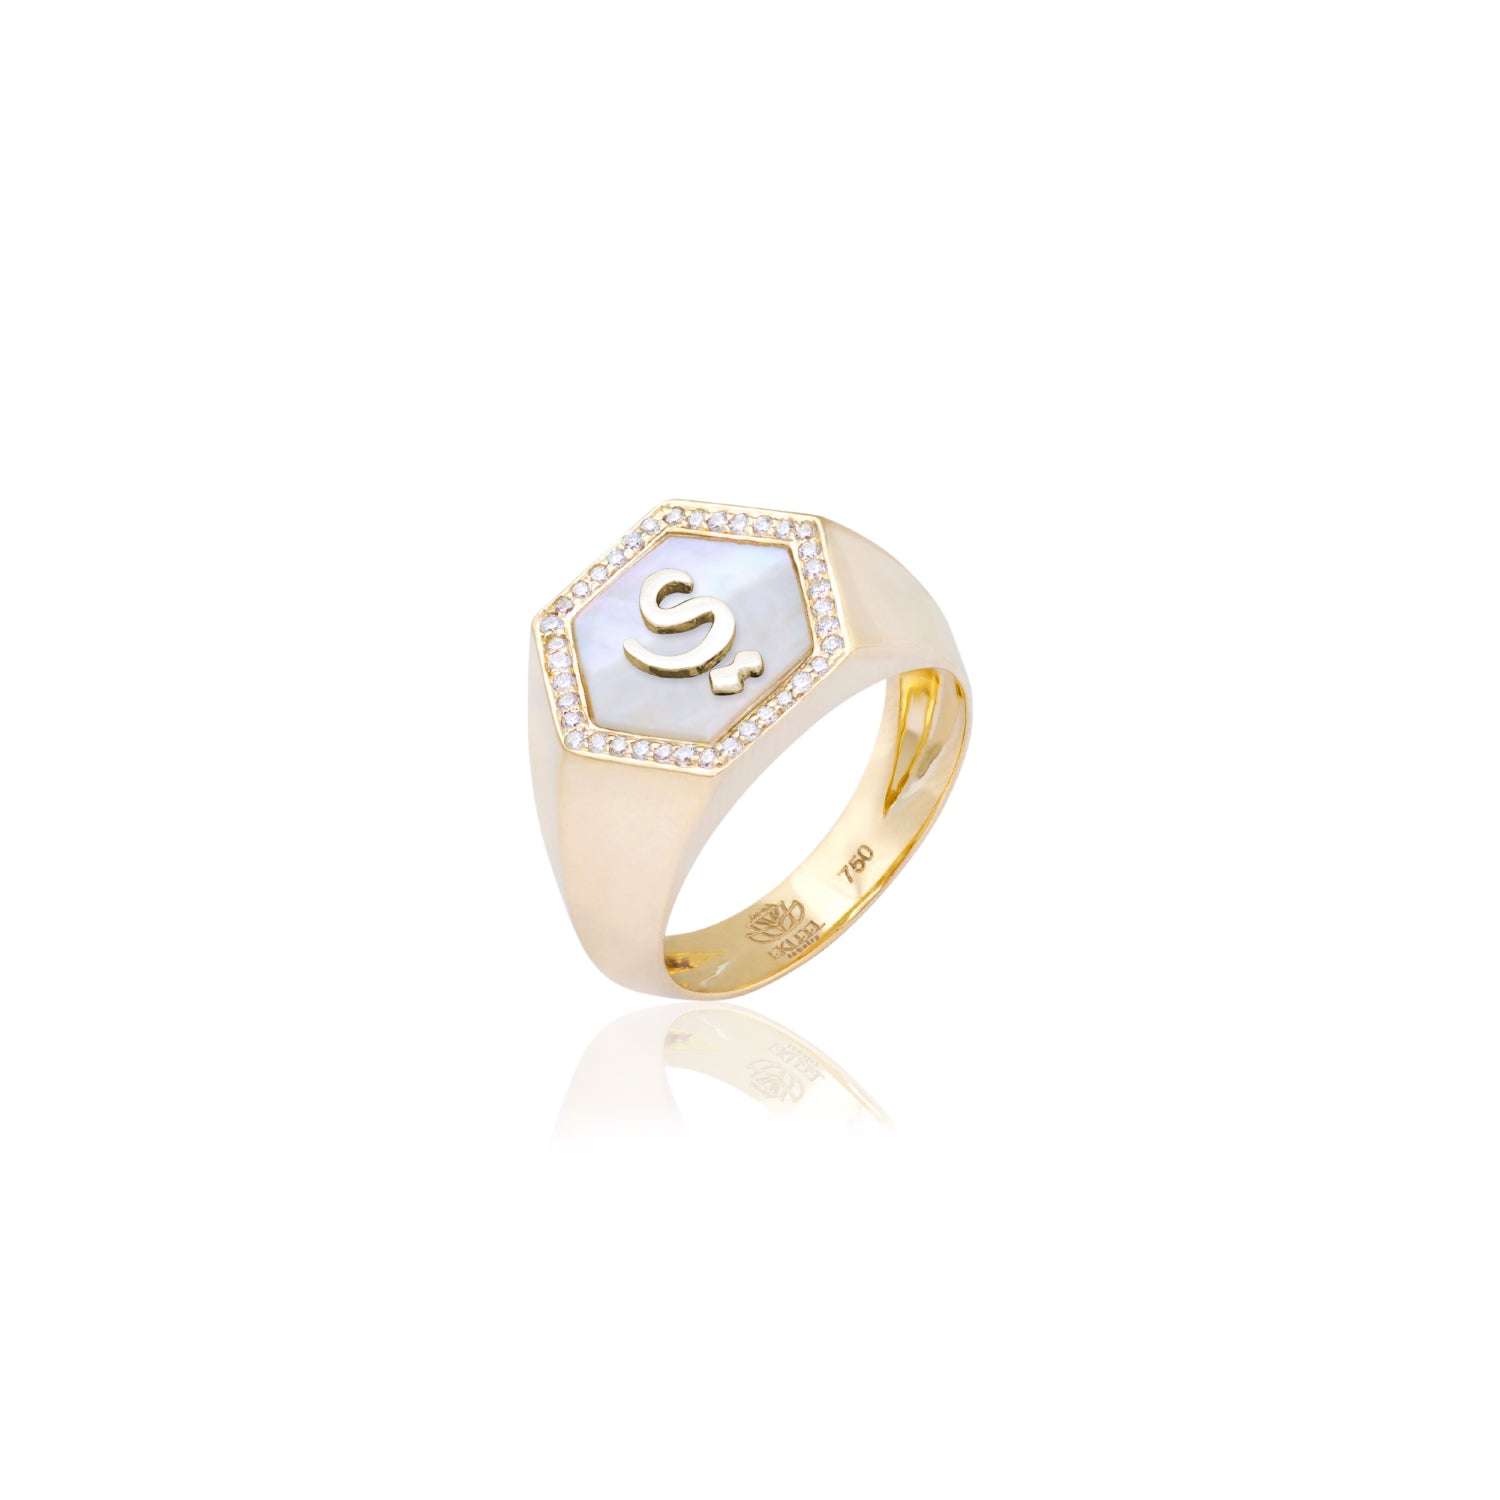 Qamoos 2.0 Letter ي White Mother of Pearl and Diamond Signet Ring in Yellow Gold